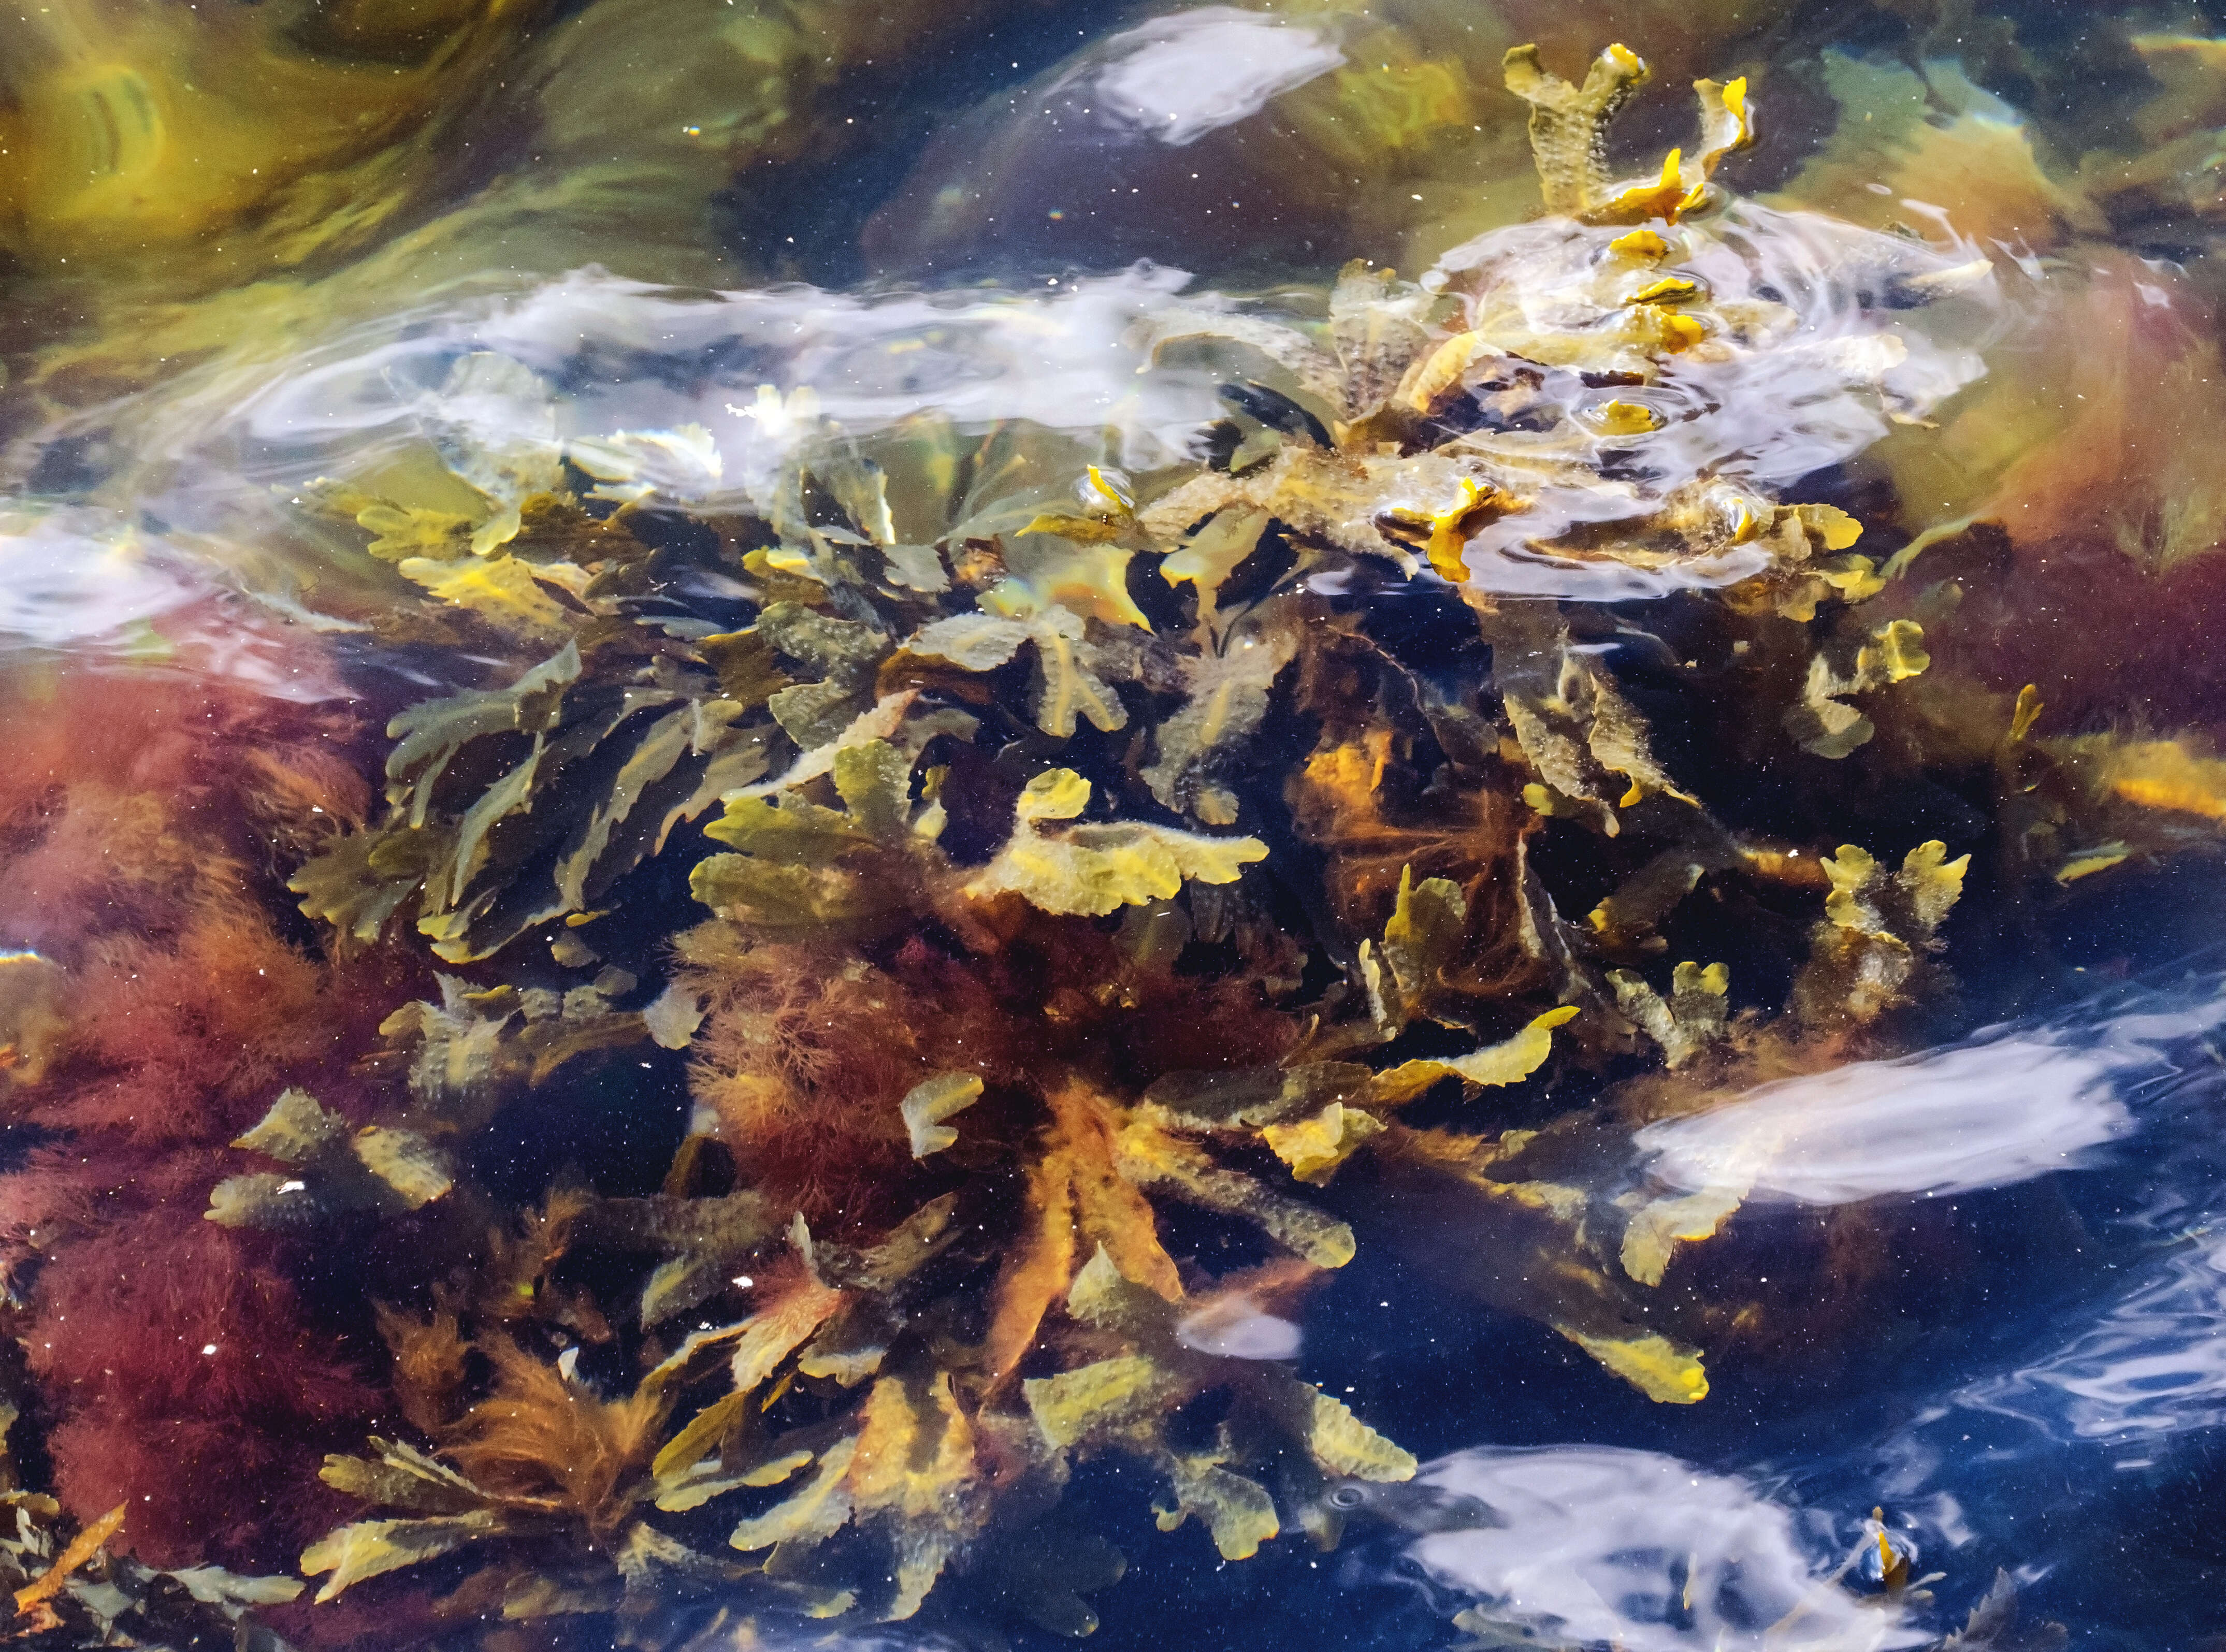 Image of toothed wrack